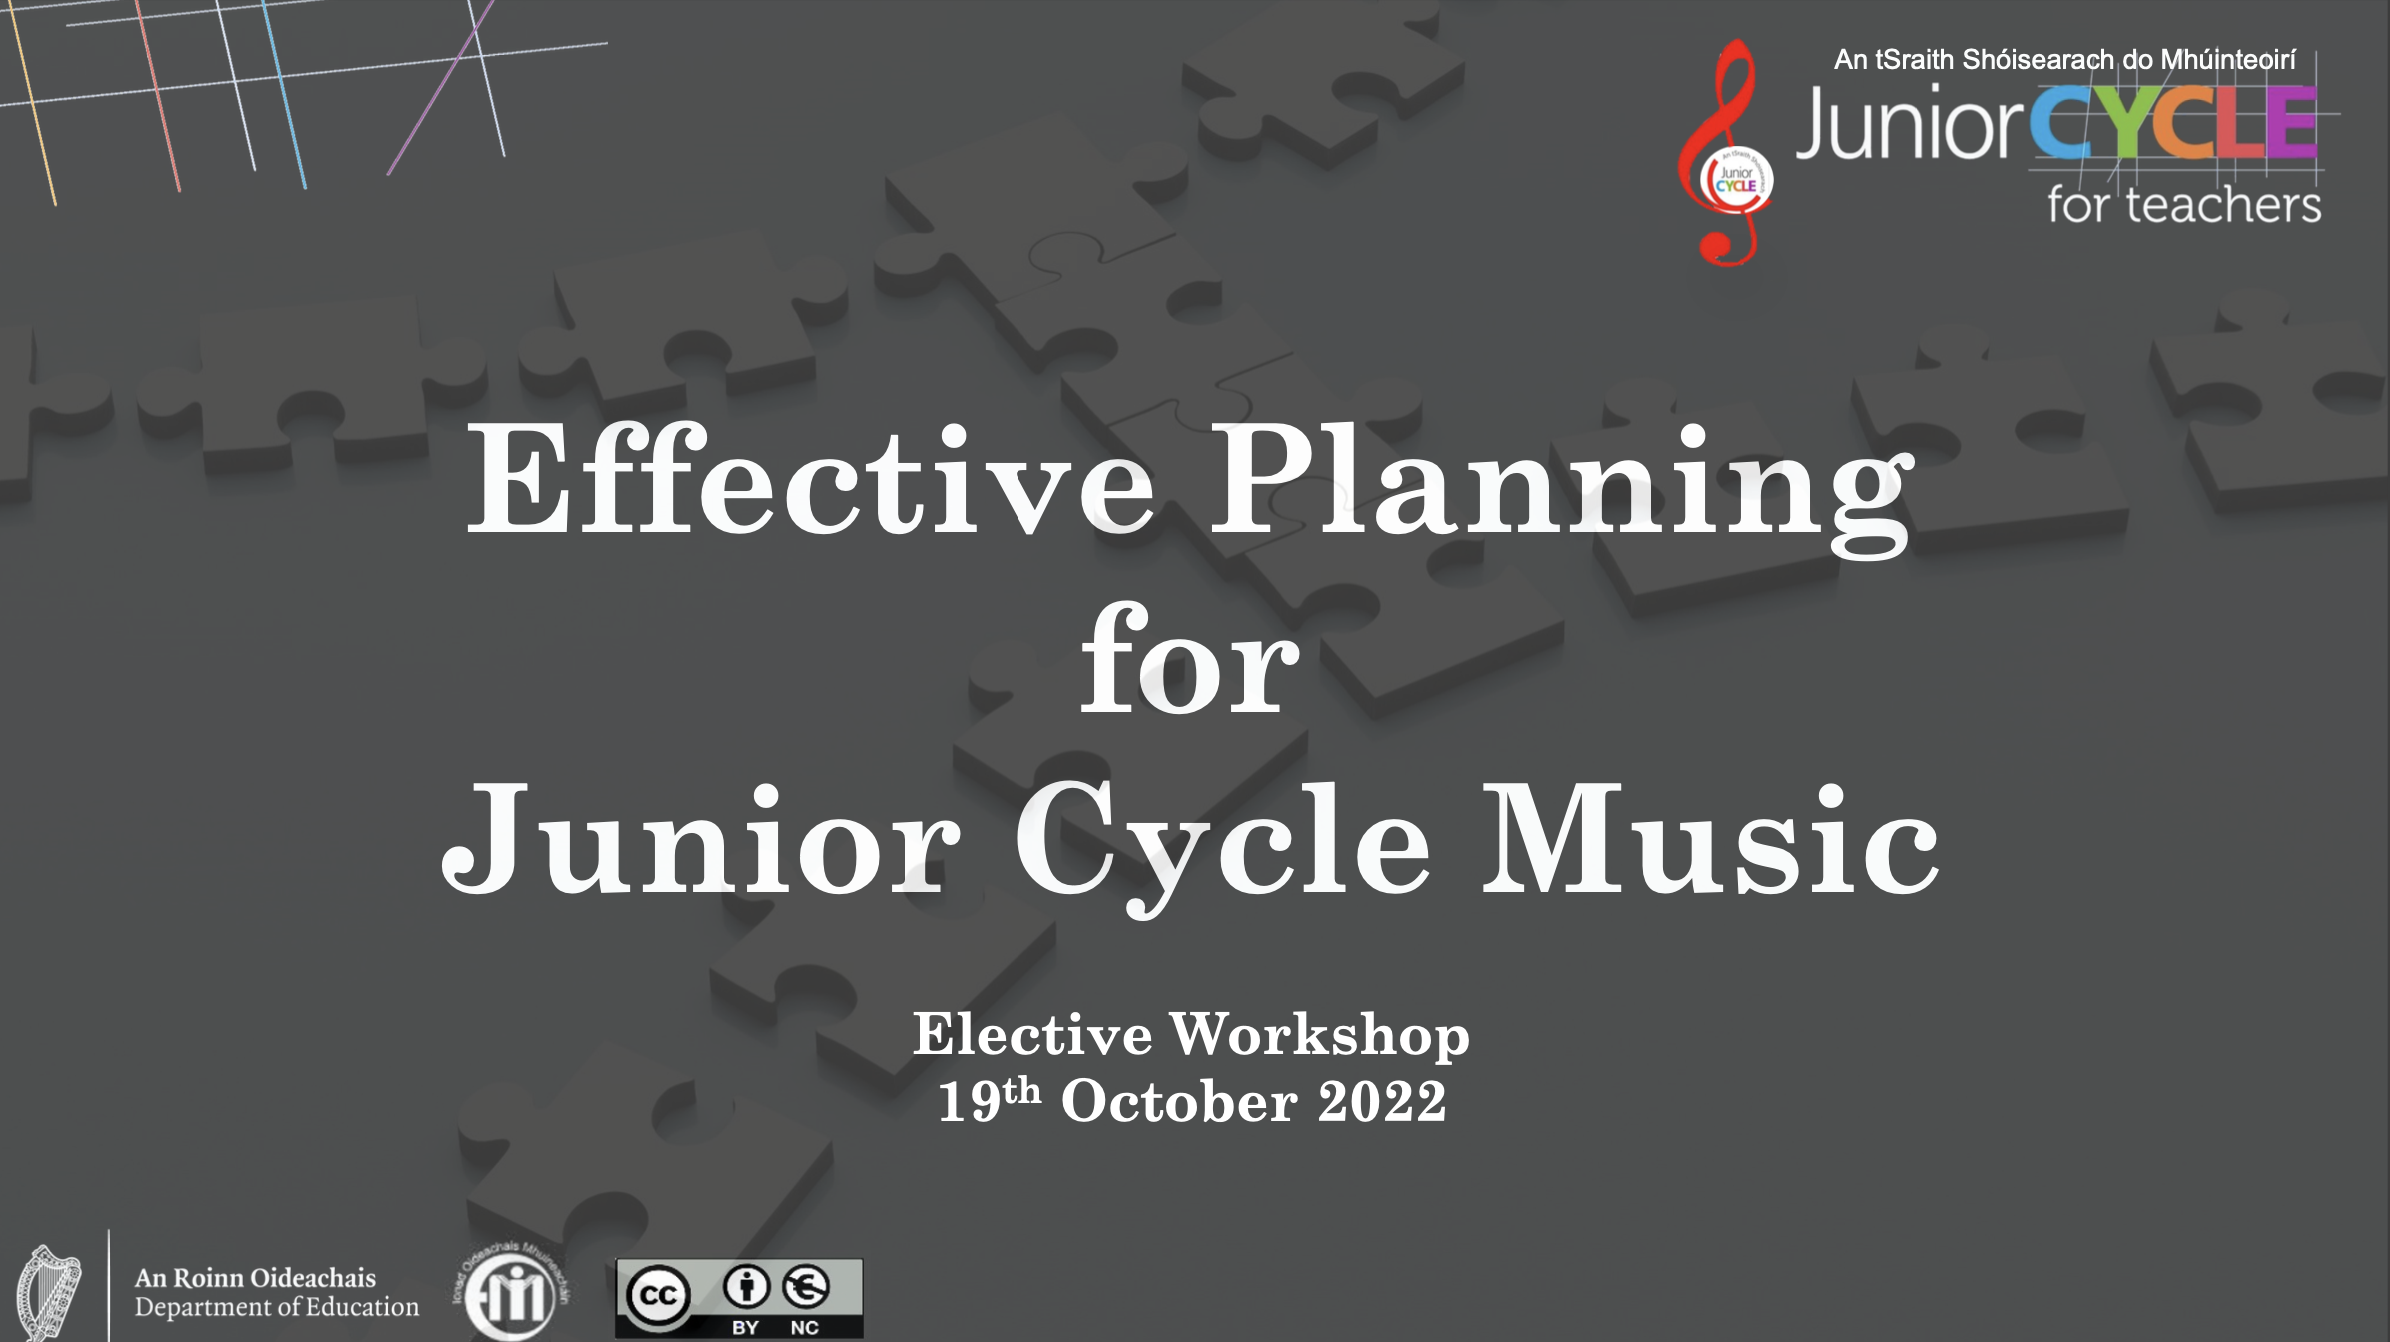 Effective Planning for Junior Cycle Music 2022